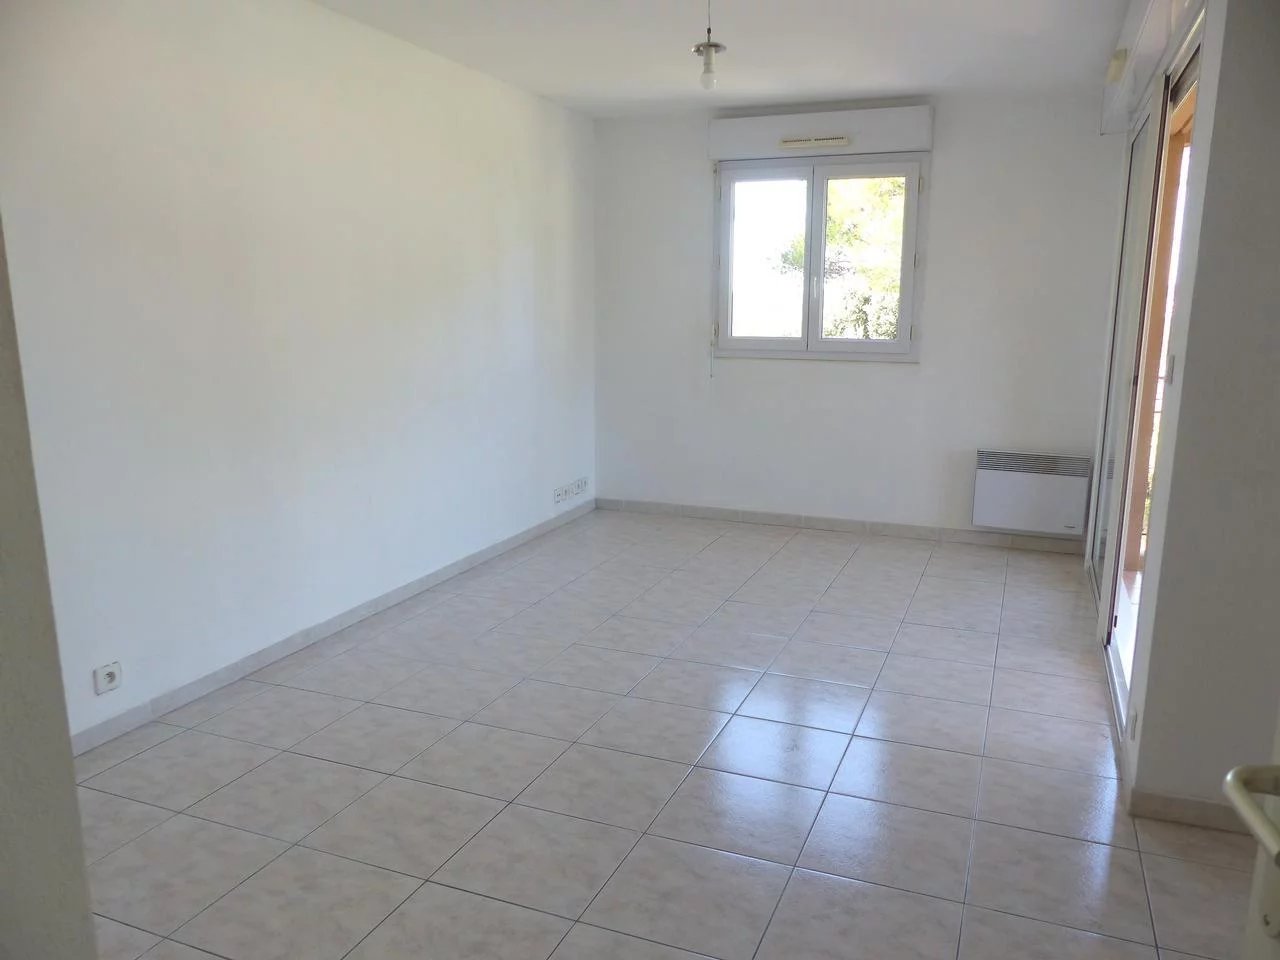 Appartement  2 Rooms 47m2  for sale   296 800 €